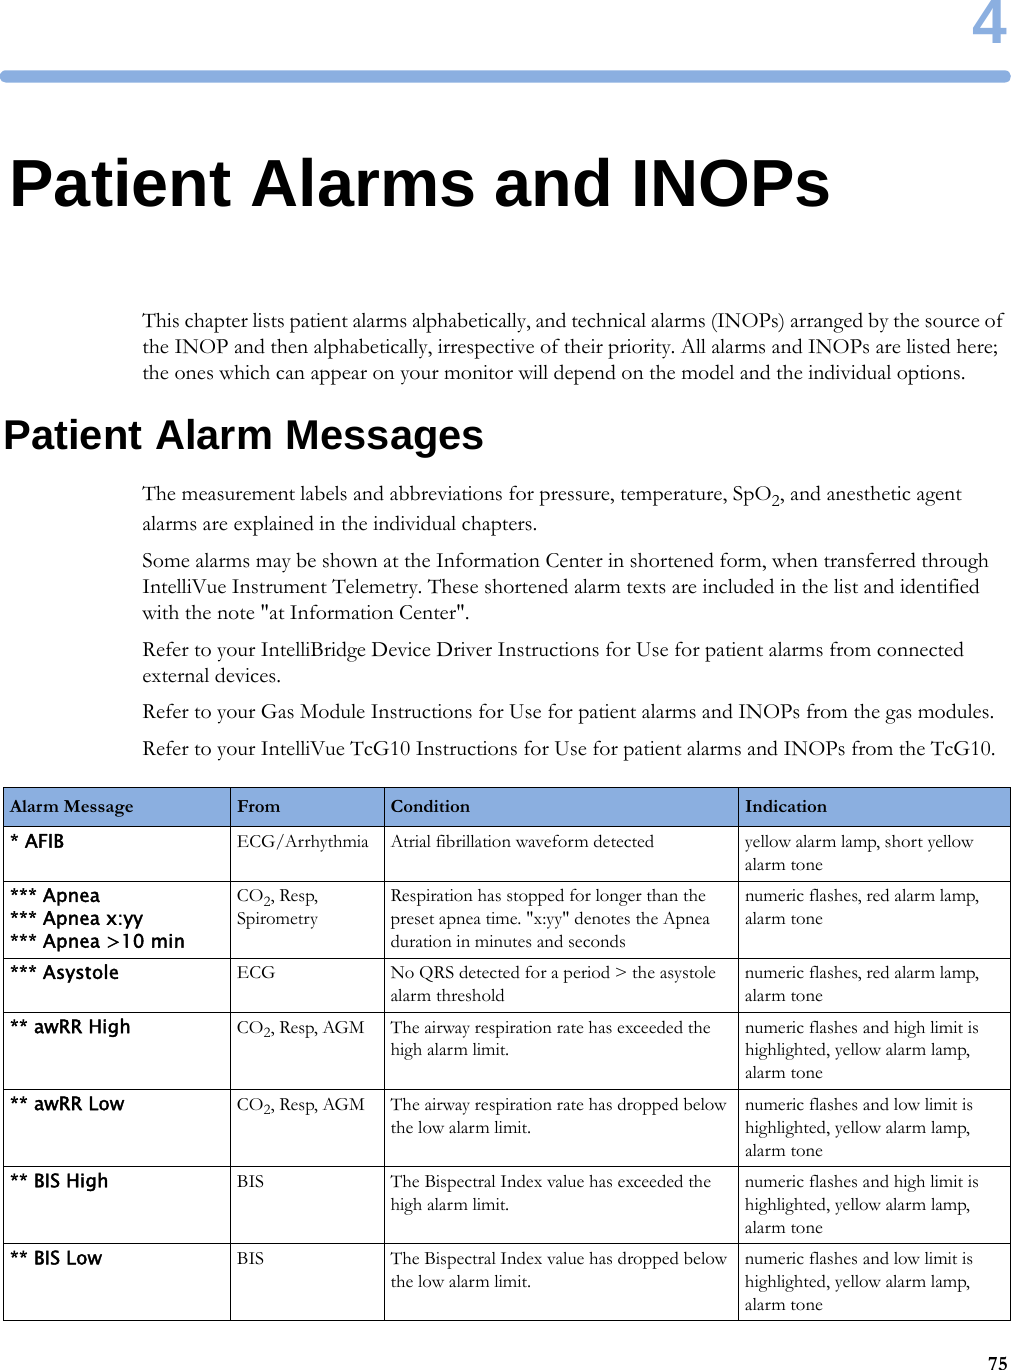 4754Patient Alarms and INOPsThis chapter lists patient alarms alphabetically, and technical alarms (INOPs) arranged by the source of the INOP and then alphabetically, irrespective of their priority. All alarms and INOPs are listed here; the ones which can appear on your monitor will depend on the model and the individual options.Patient Alarm MessagesThe measurement labels and abbreviations for pressure, temperature, SpO2, and anesthetic agent alarms are explained in the individual chapters.Some alarms may be shown at the Information Center in shortened form, when transferred through IntelliVue Instrument Telemetry. These shortened alarm texts are included in the list and identified with the note &quot;at Information Center&quot;.Refer to your IntelliBridge Device Driver Instructions for Use for patient alarms from connected external devices.Refer to your Gas Module Instructions for Use for patient alarms and INOPs from the gas modules.Refer to your IntelliVue TcG10 Instructions for Use for patient alarms and INOPs from the TcG10.Alarm Message From Condition Indication* AFIB ECG/Arrhythmia Atrial fibrillation waveform detected yellow alarm lamp, short yellow alarm tone*** Apnea*** Apnea x:yy*** Apnea &gt;10 minCO2, Resp, SpirometryRespiration has stopped for longer than the preset apnea time. &quot;x:yy&quot; denotes the Apnea duration in minutes and secondsnumeric flashes, red alarm lamp, alarm tone*** Asystole ECG No QRS detected for a period &gt; the asystole alarm thresholdnumeric flashes, red alarm lamp, alarm tone** awRR High CO2, Resp, AGM The airway respiration rate has exceeded the high alarm limit.numeric flashes and high limit is highlighted, yellow alarm lamp, alarm tone** awRR Low CO2, Resp, AGM The airway respiration rate has dropped below the low alarm limit.numeric flashes and low limit is highlighted, yellow alarm lamp, alarm tone** BIS High BIS The Bispectral Index value has exceeded the high alarm limit.numeric flashes and high limit is highlighted, yellow alarm lamp, alarm tone** BIS Low BIS The Bispectral Index value has dropped below the low alarm limit.numeric flashes and low limit is highlighted, yellow alarm lamp, alarm tone